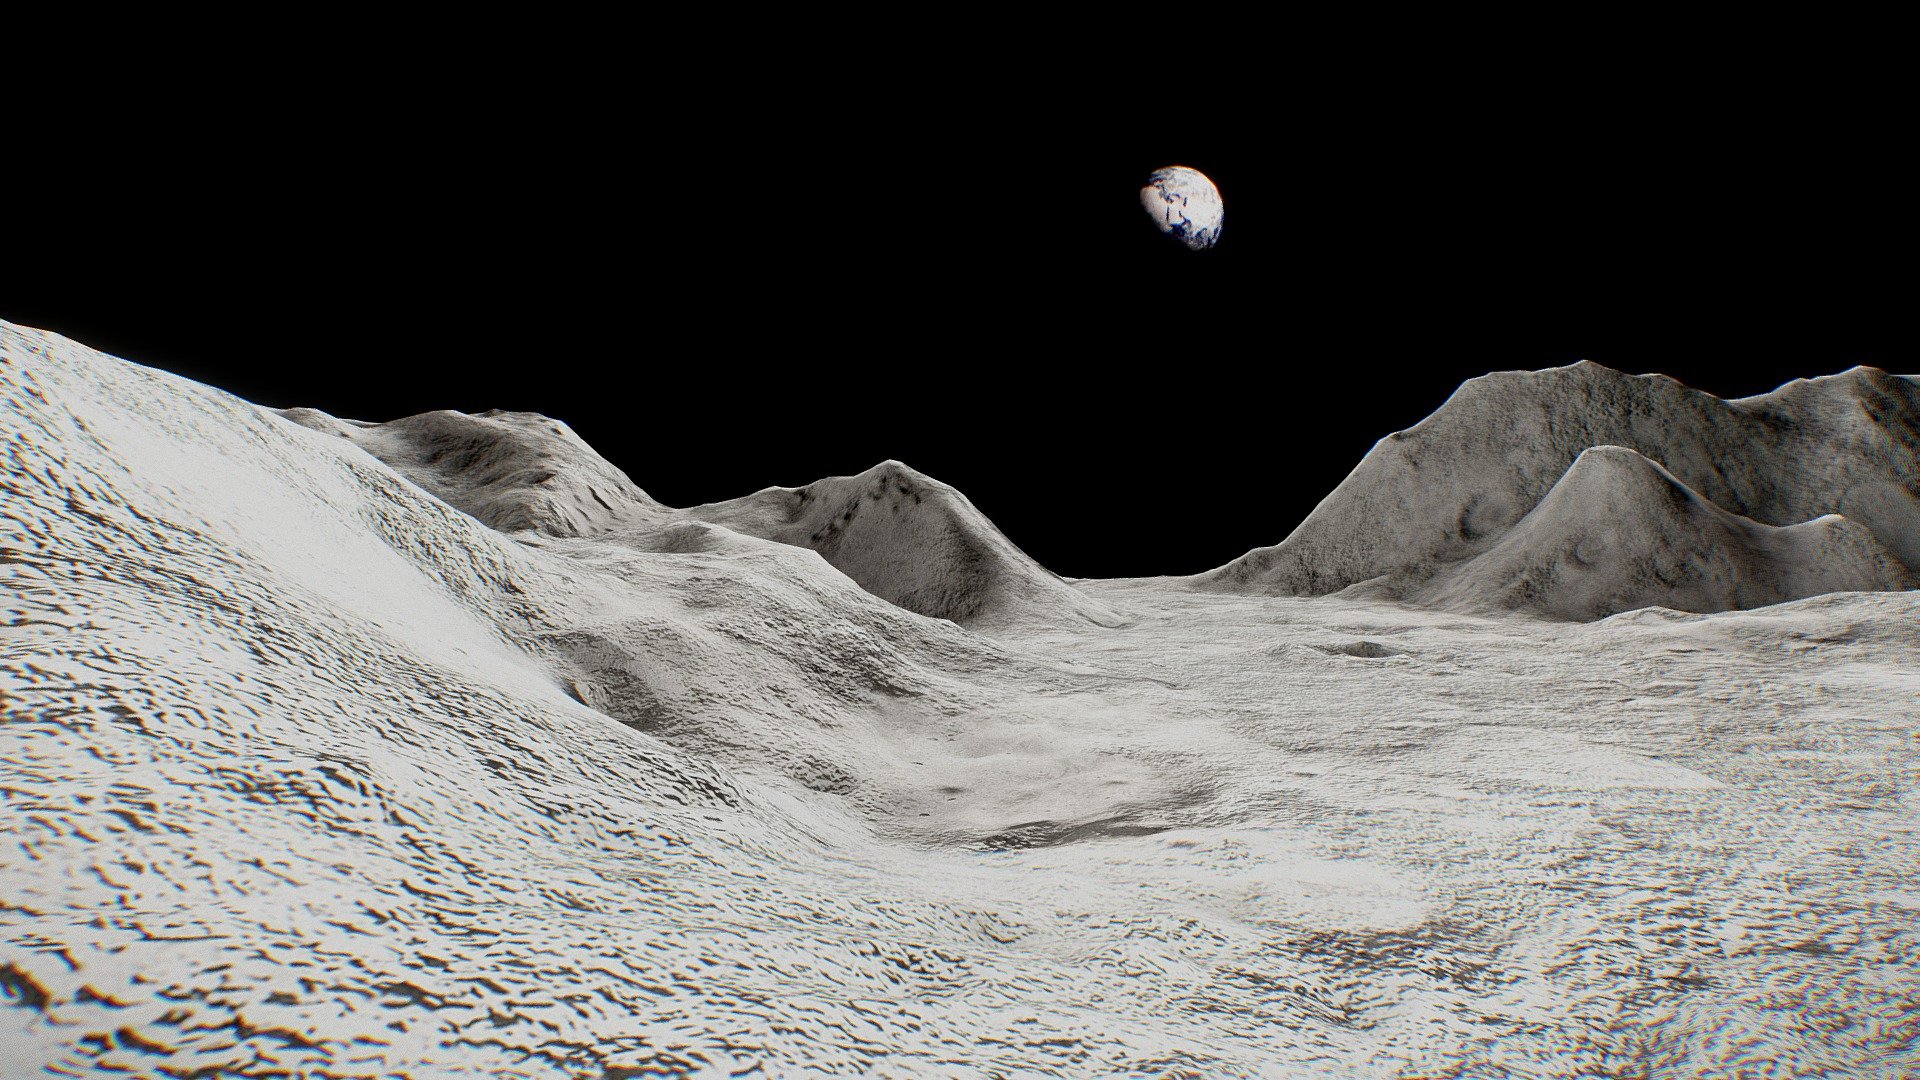 This is a Moon place created especially for virtual spaces, optimized for mobiles and augmented reality.
visit our new website:  https://www.marcovirtual-mx.com/

Modeling/Baking: Blender

Textured: Substance Painter

Texture Size: 4k - 1k

If you have ideas about your scenario contact us: marco.virtual.mx@gmail.com - Moon |Baked| VR Ready - Buy Royalty Free 3D model by Marco Virtual (@marco_virtual) 3d model